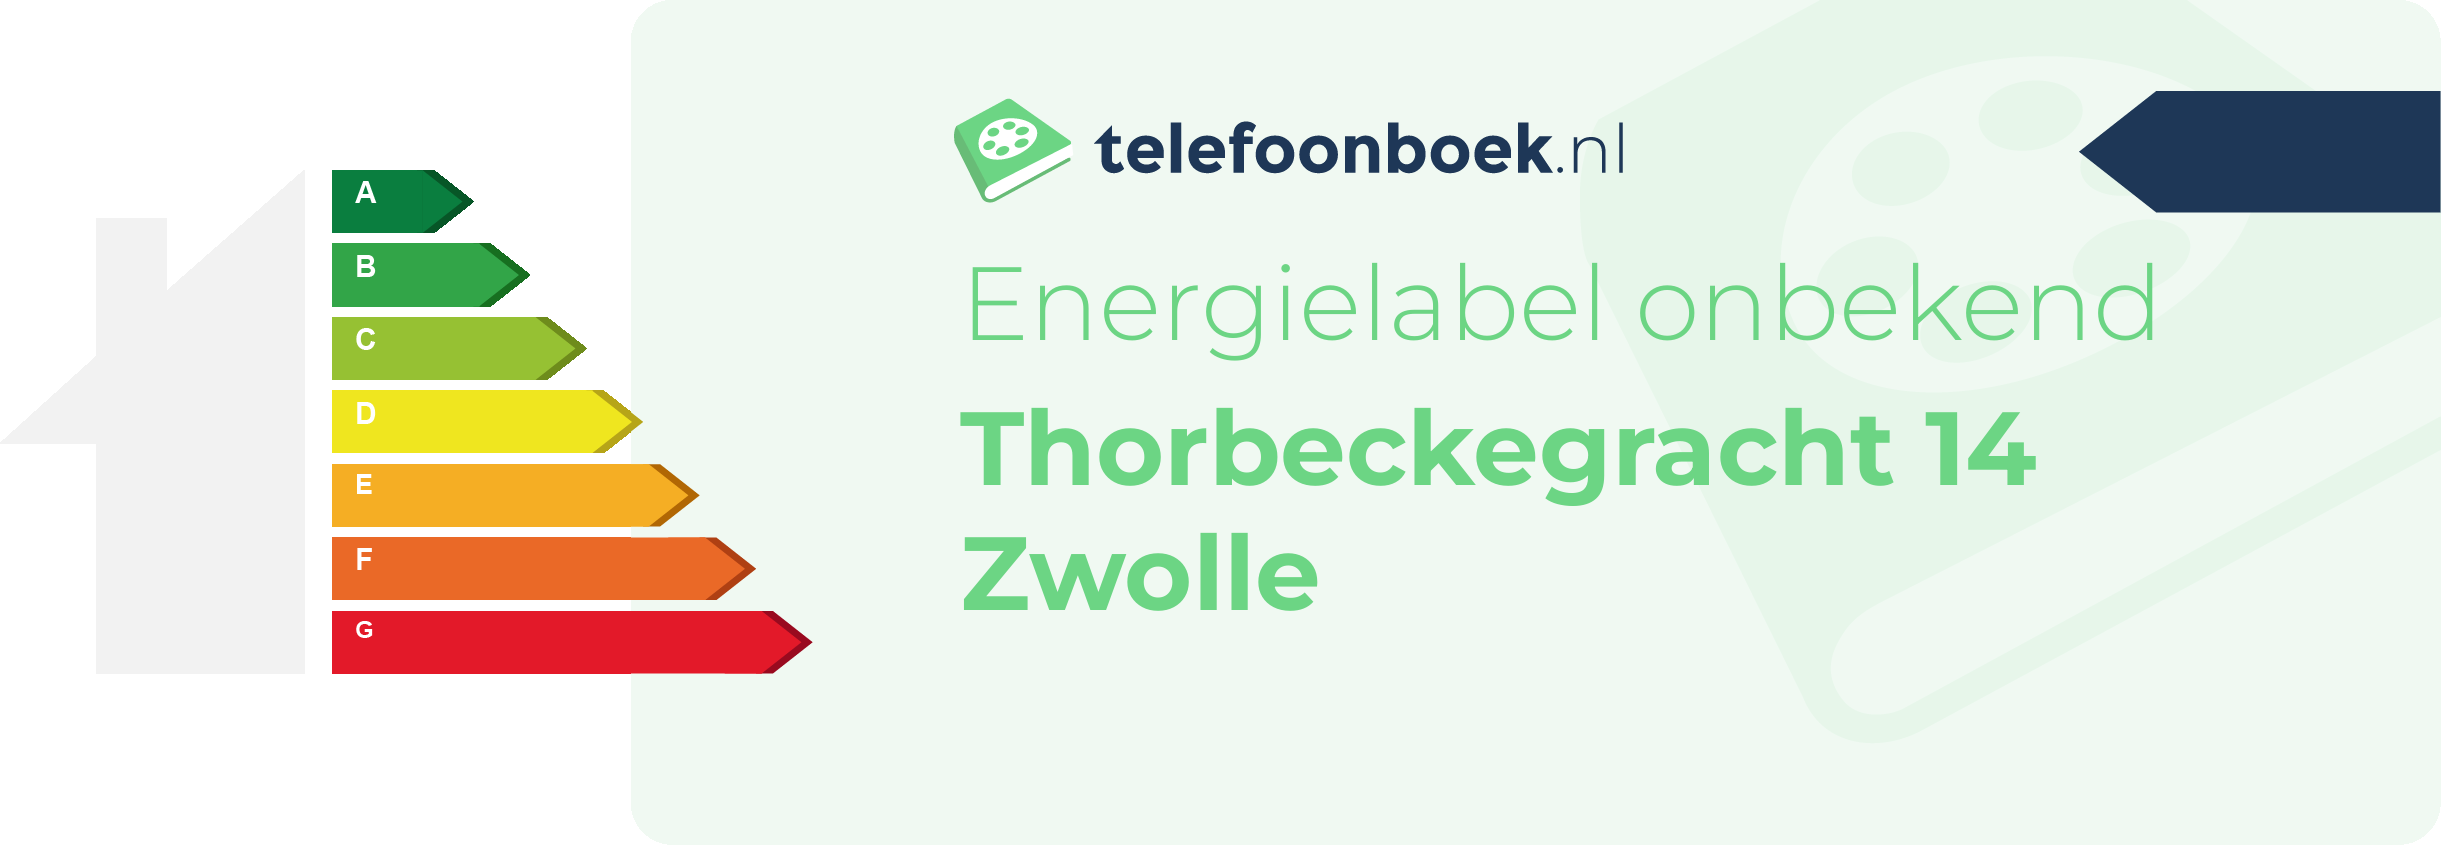 Energielabel Thorbeckegracht 14 Zwolle